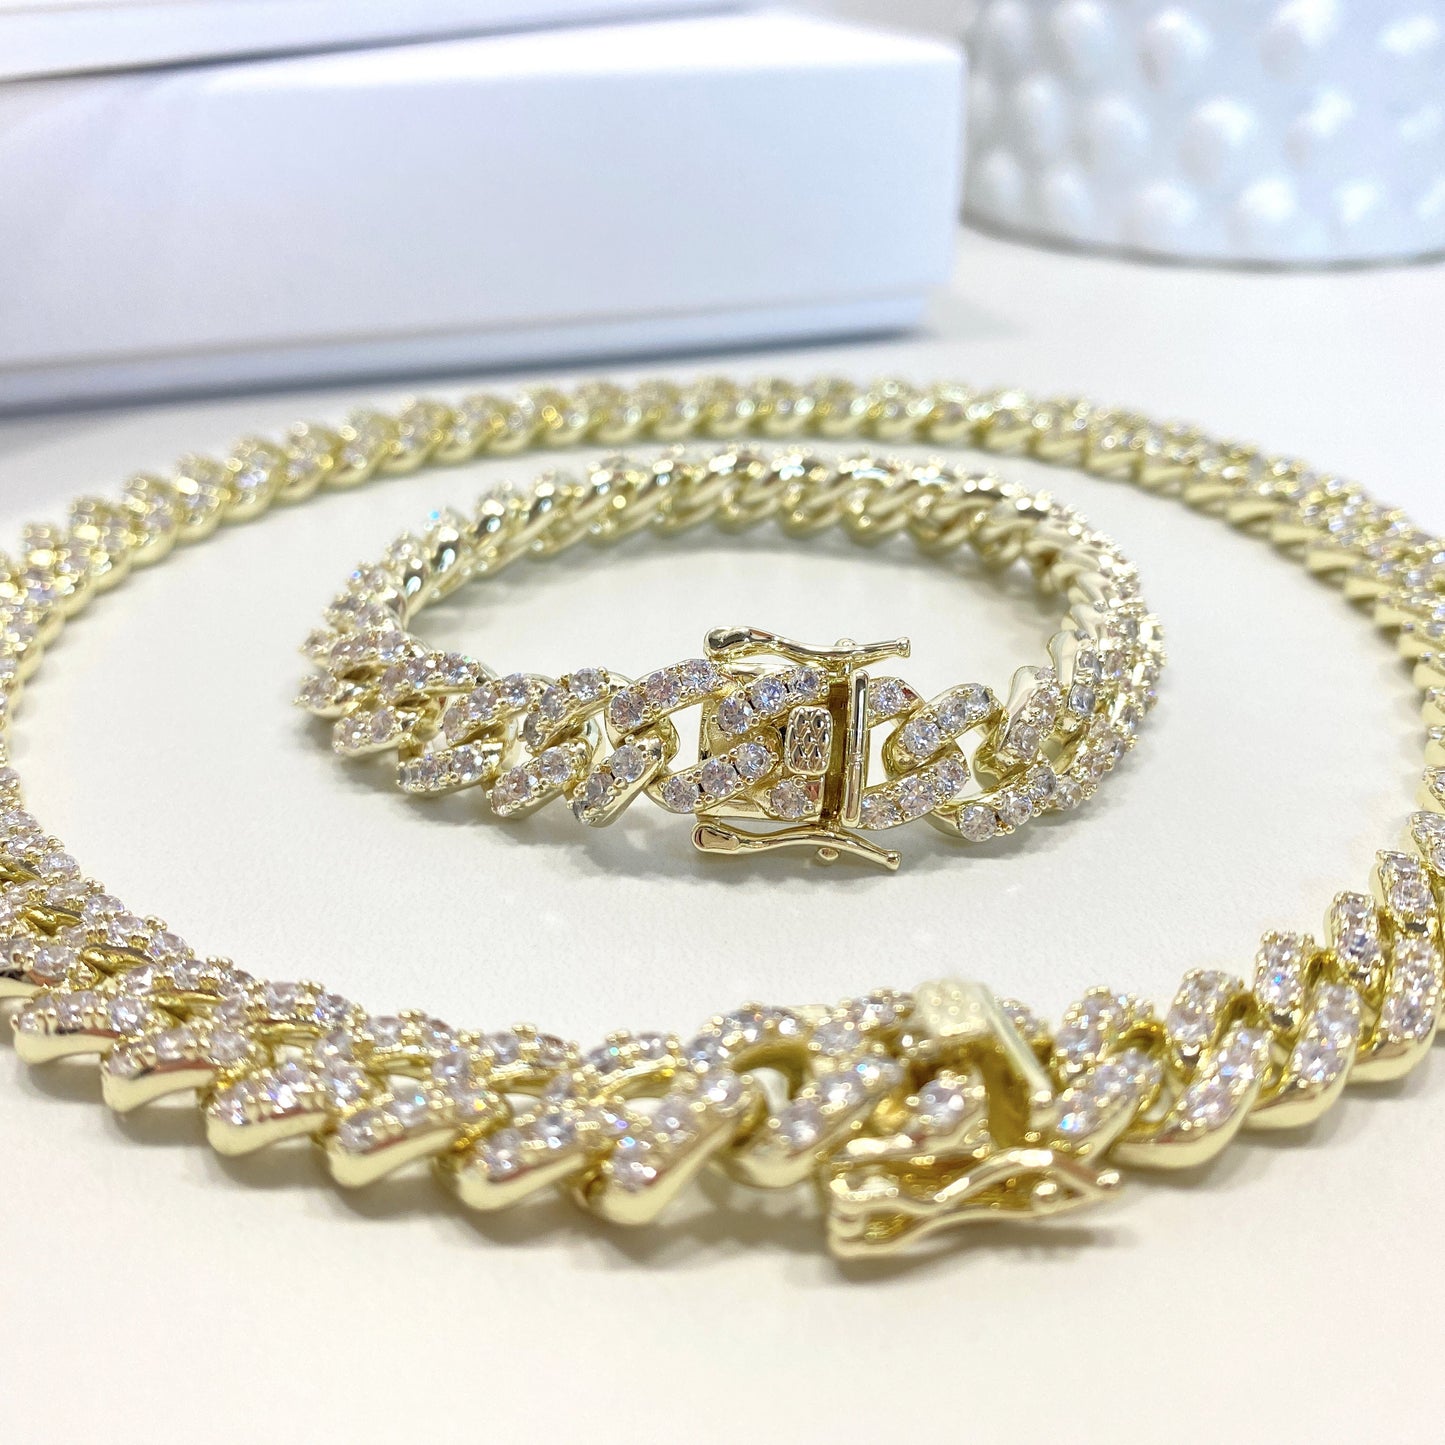 14k Gold Filled 10mm Iced Miami Cuban Chain Featuring Double Safety Lock Box Cubic Zirconia, Chain or Bracelet, Wholesale Jewelry Supplies